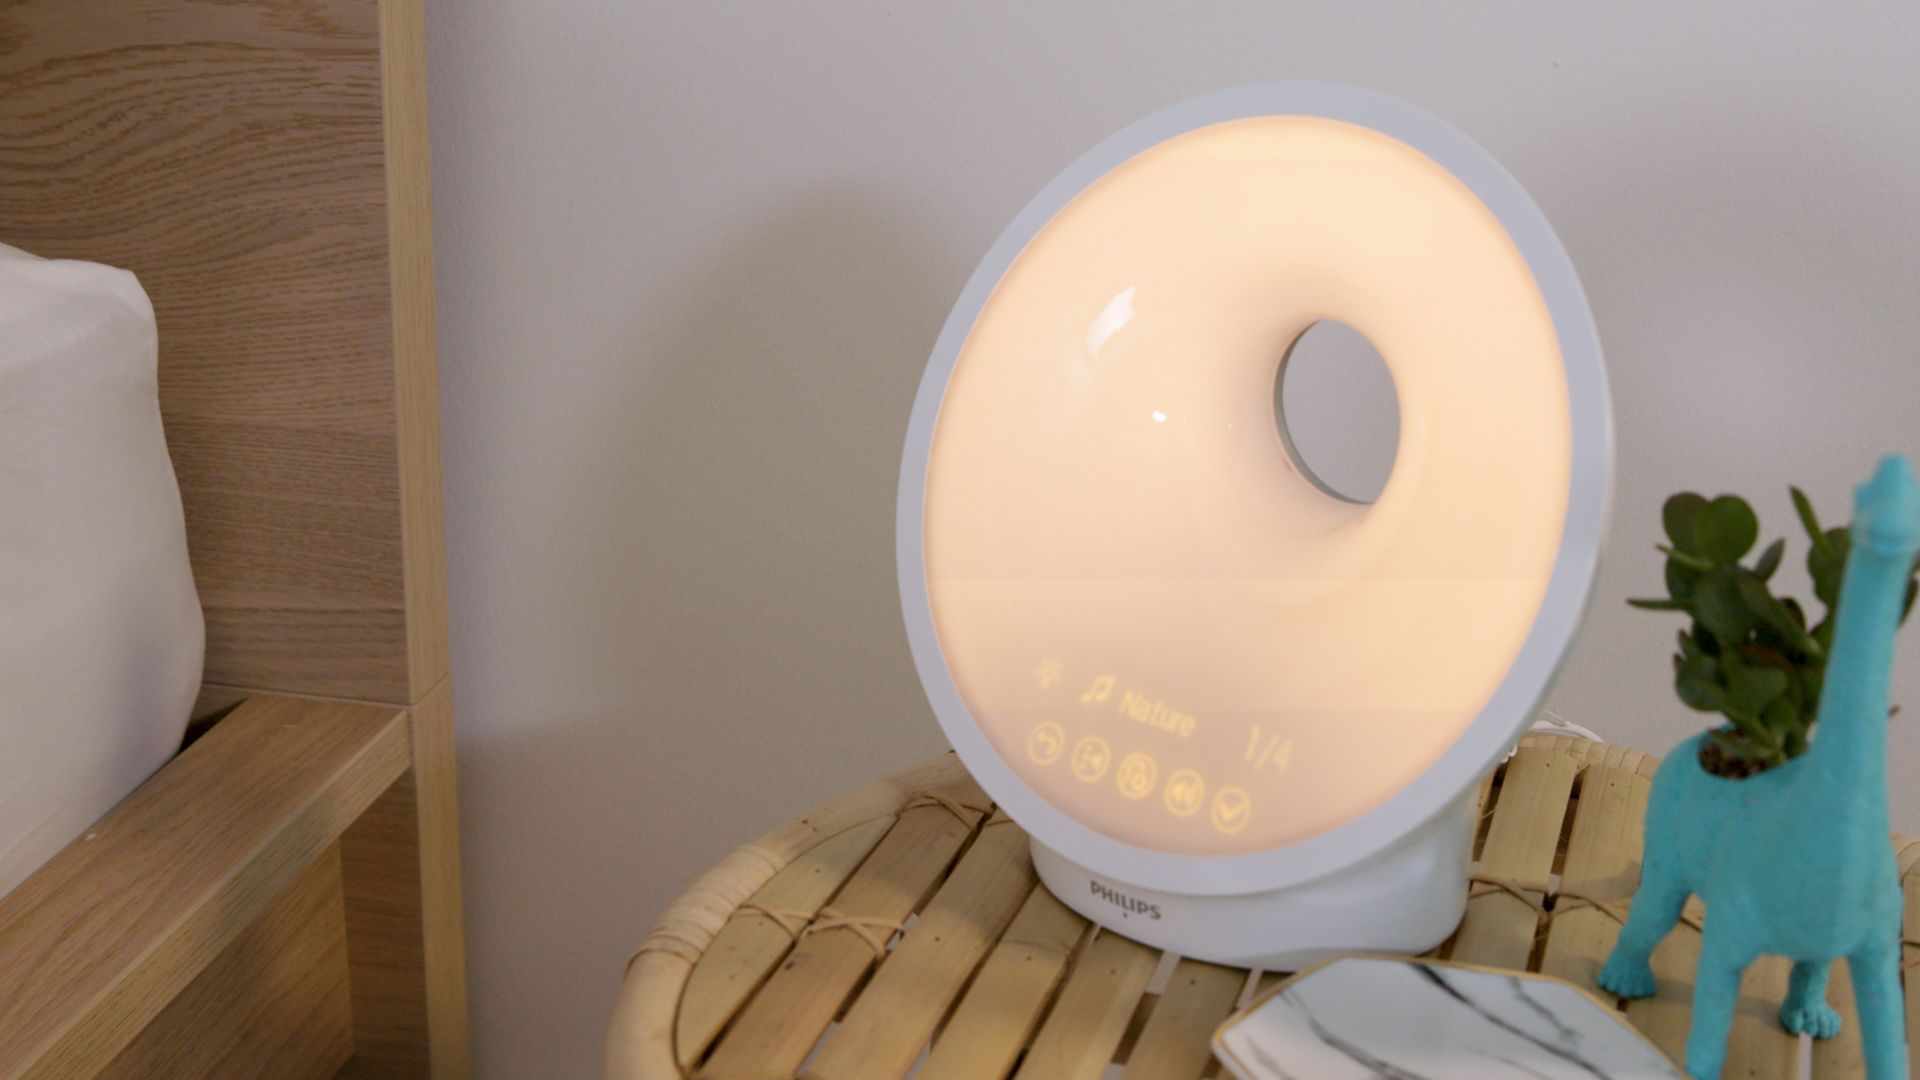 Philips' new wake-up light makes getting up easier